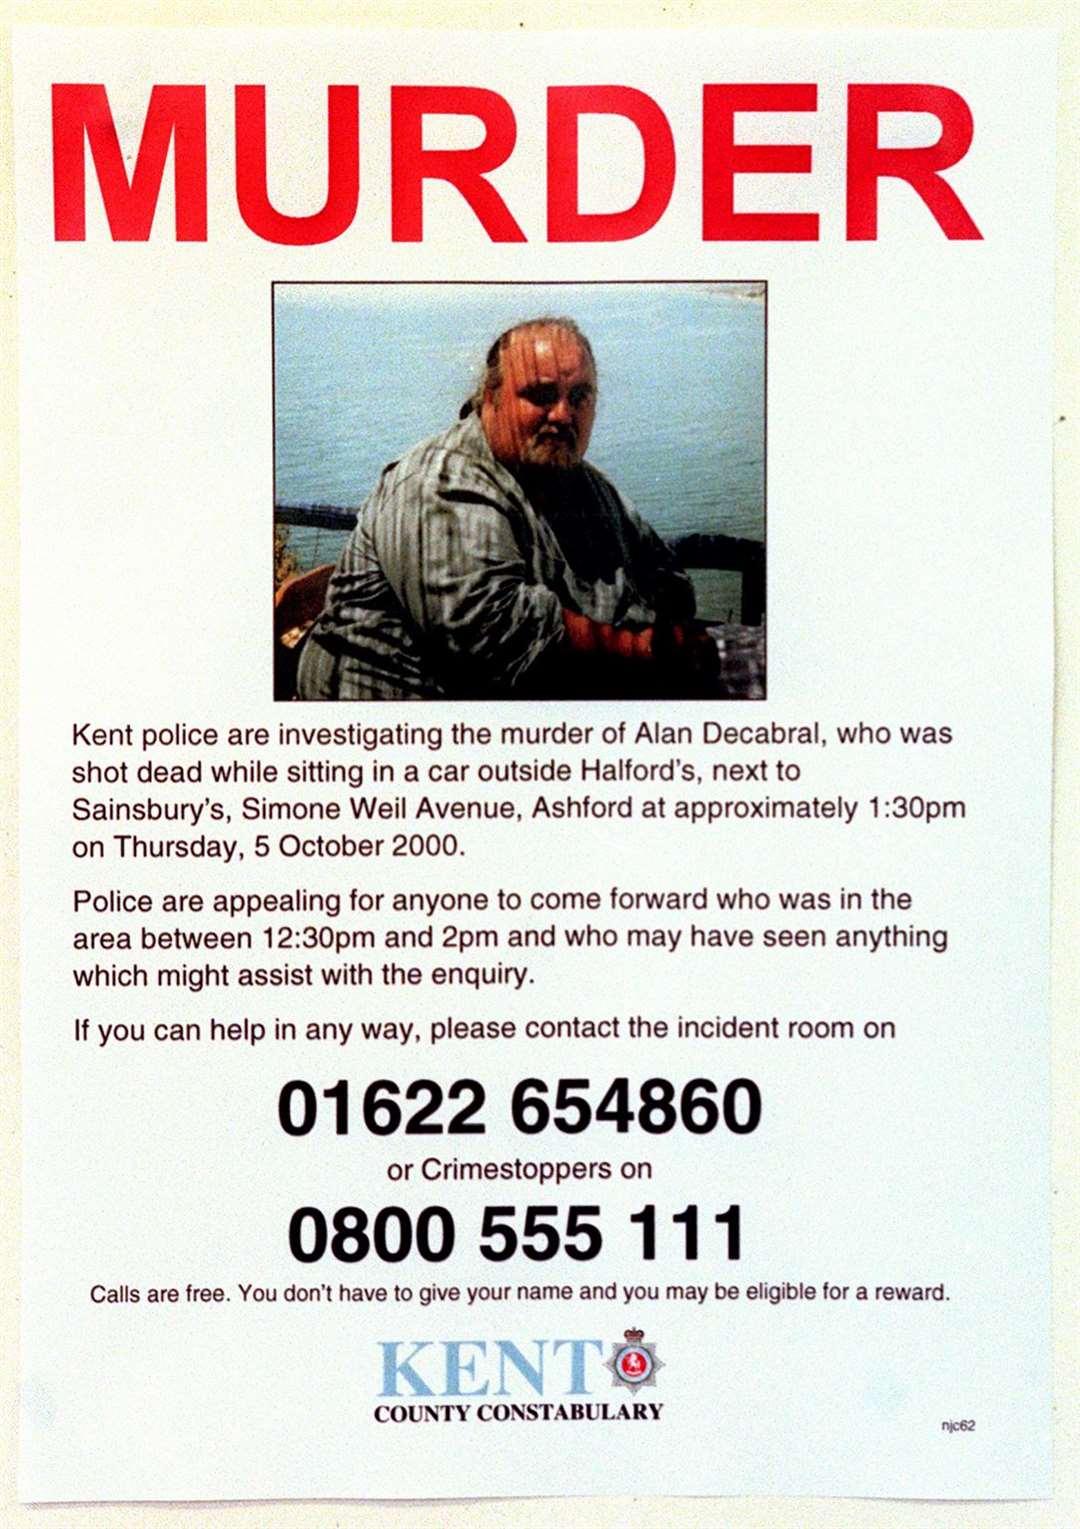 Leaflets were handed out to shoppers after the murder